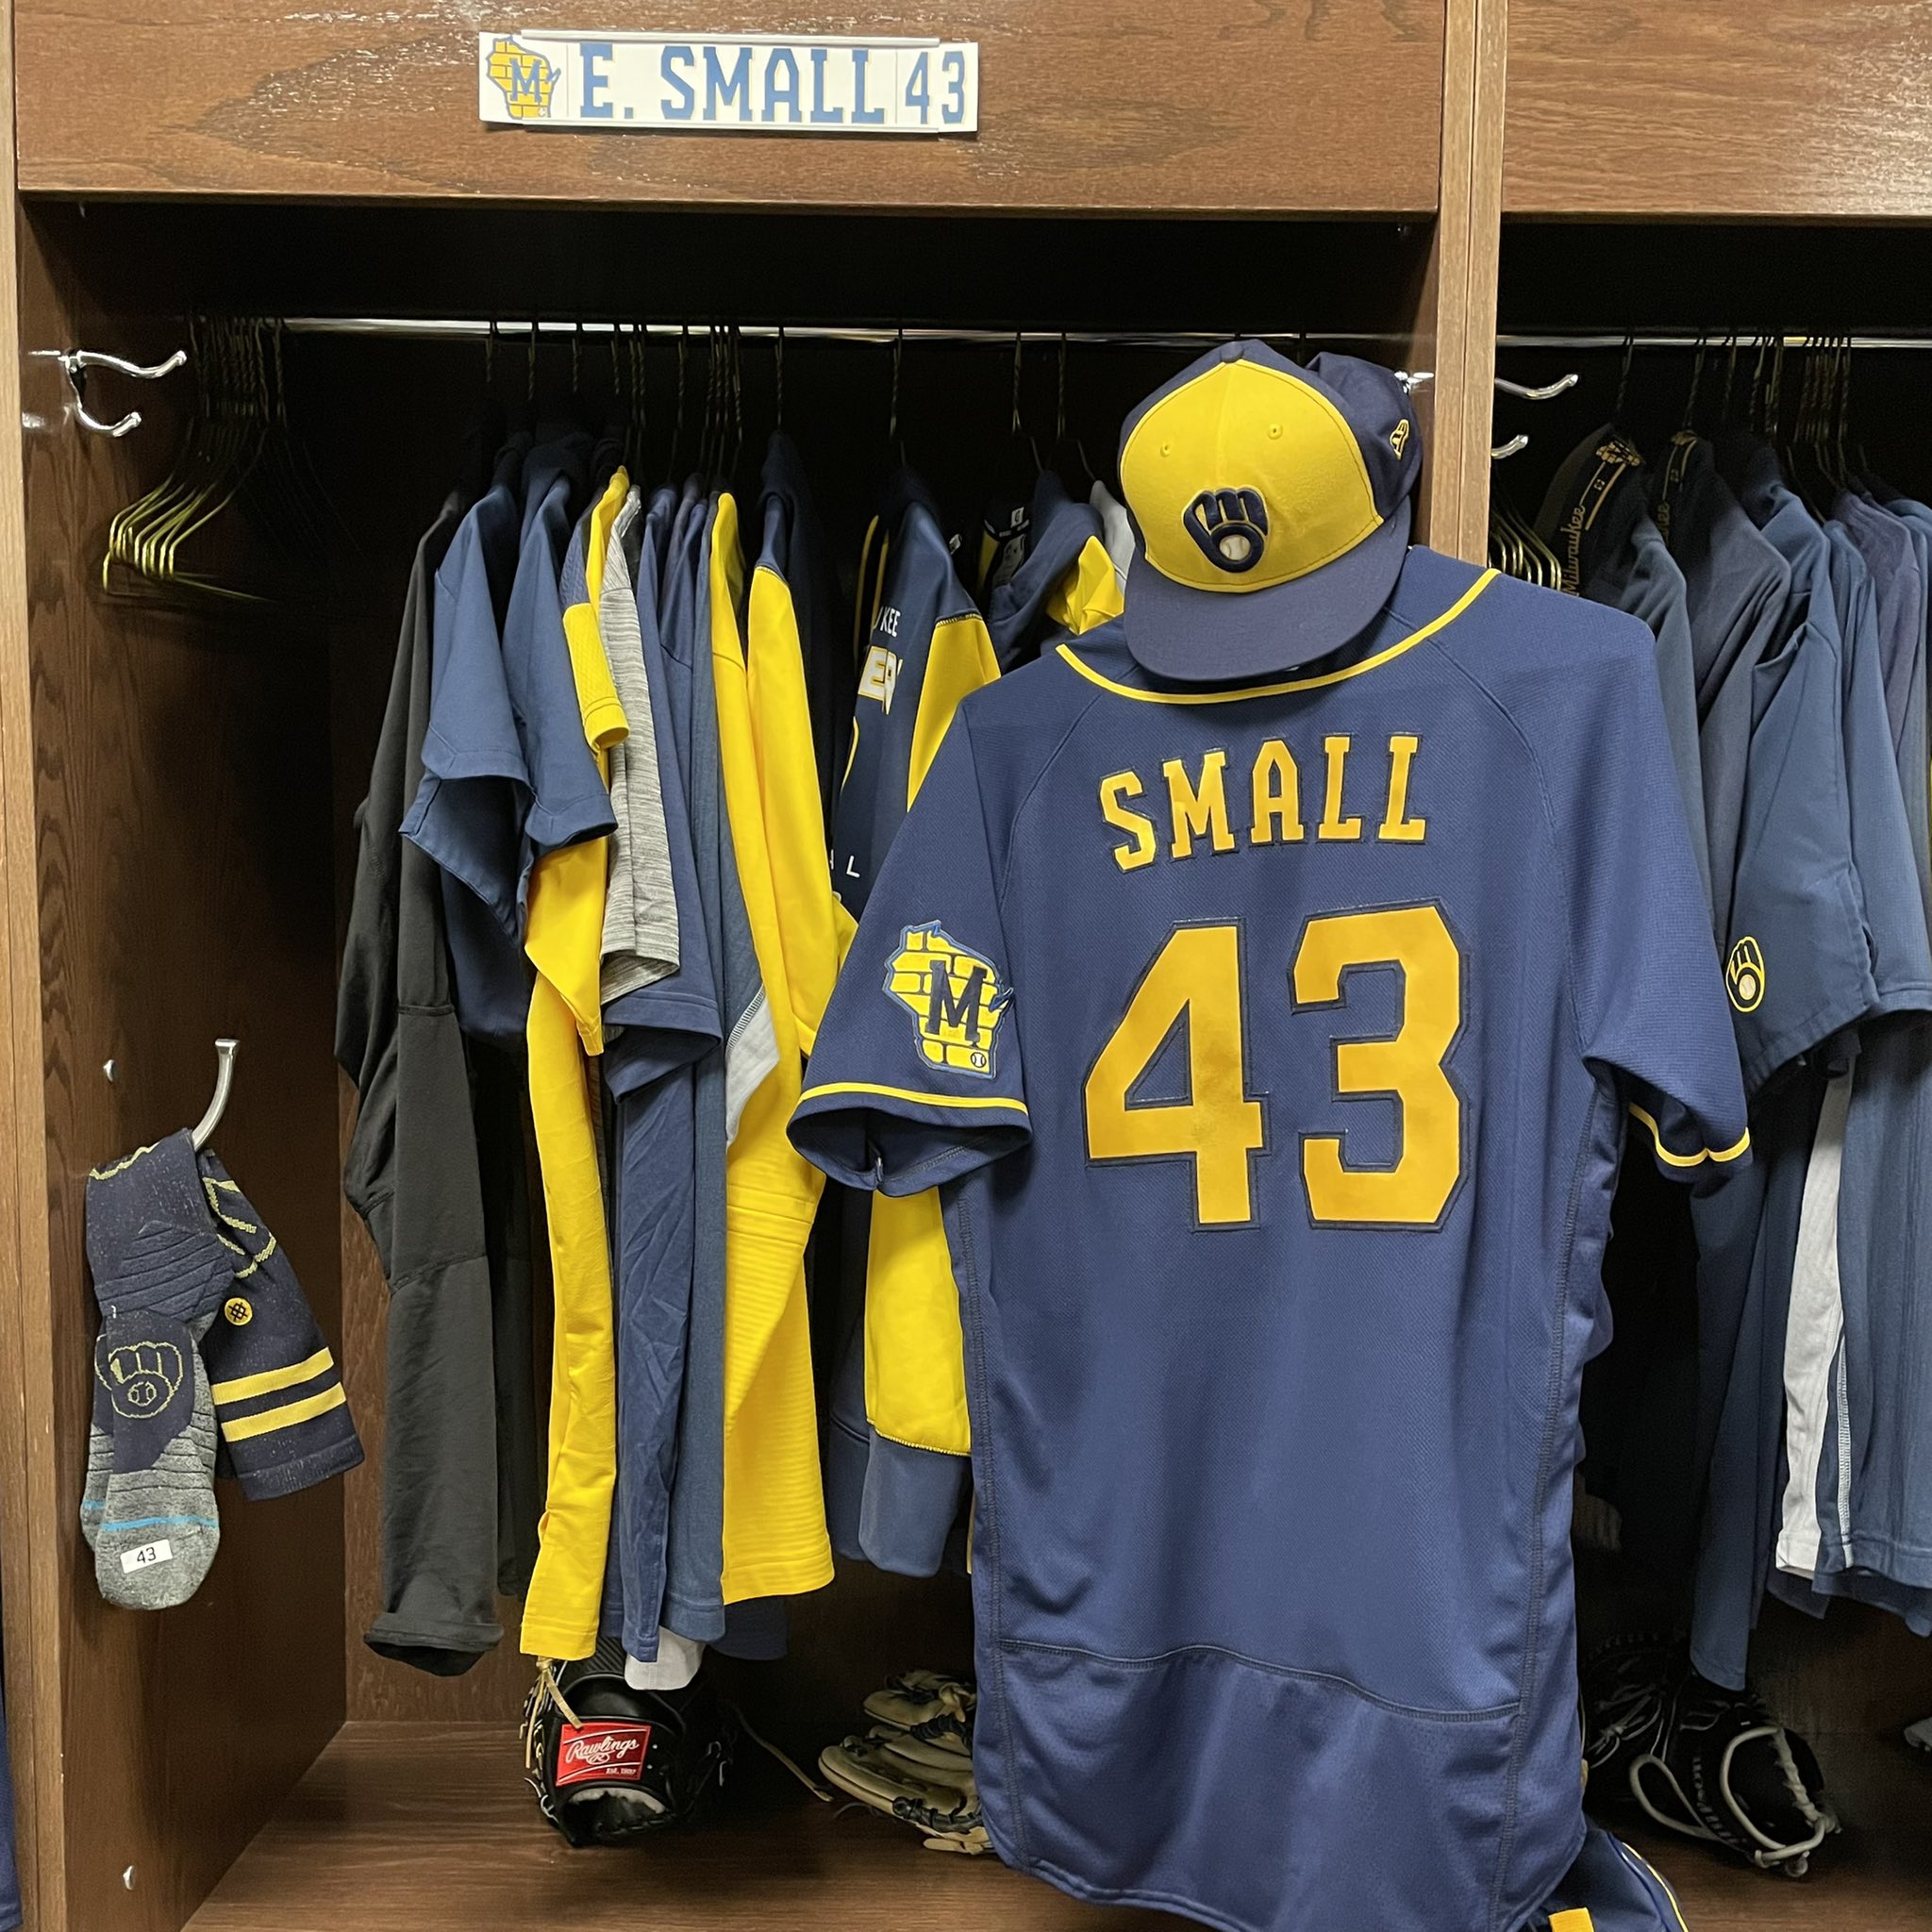 Milwaukee Brewers on X: Locker prepped and ready for the @MLB